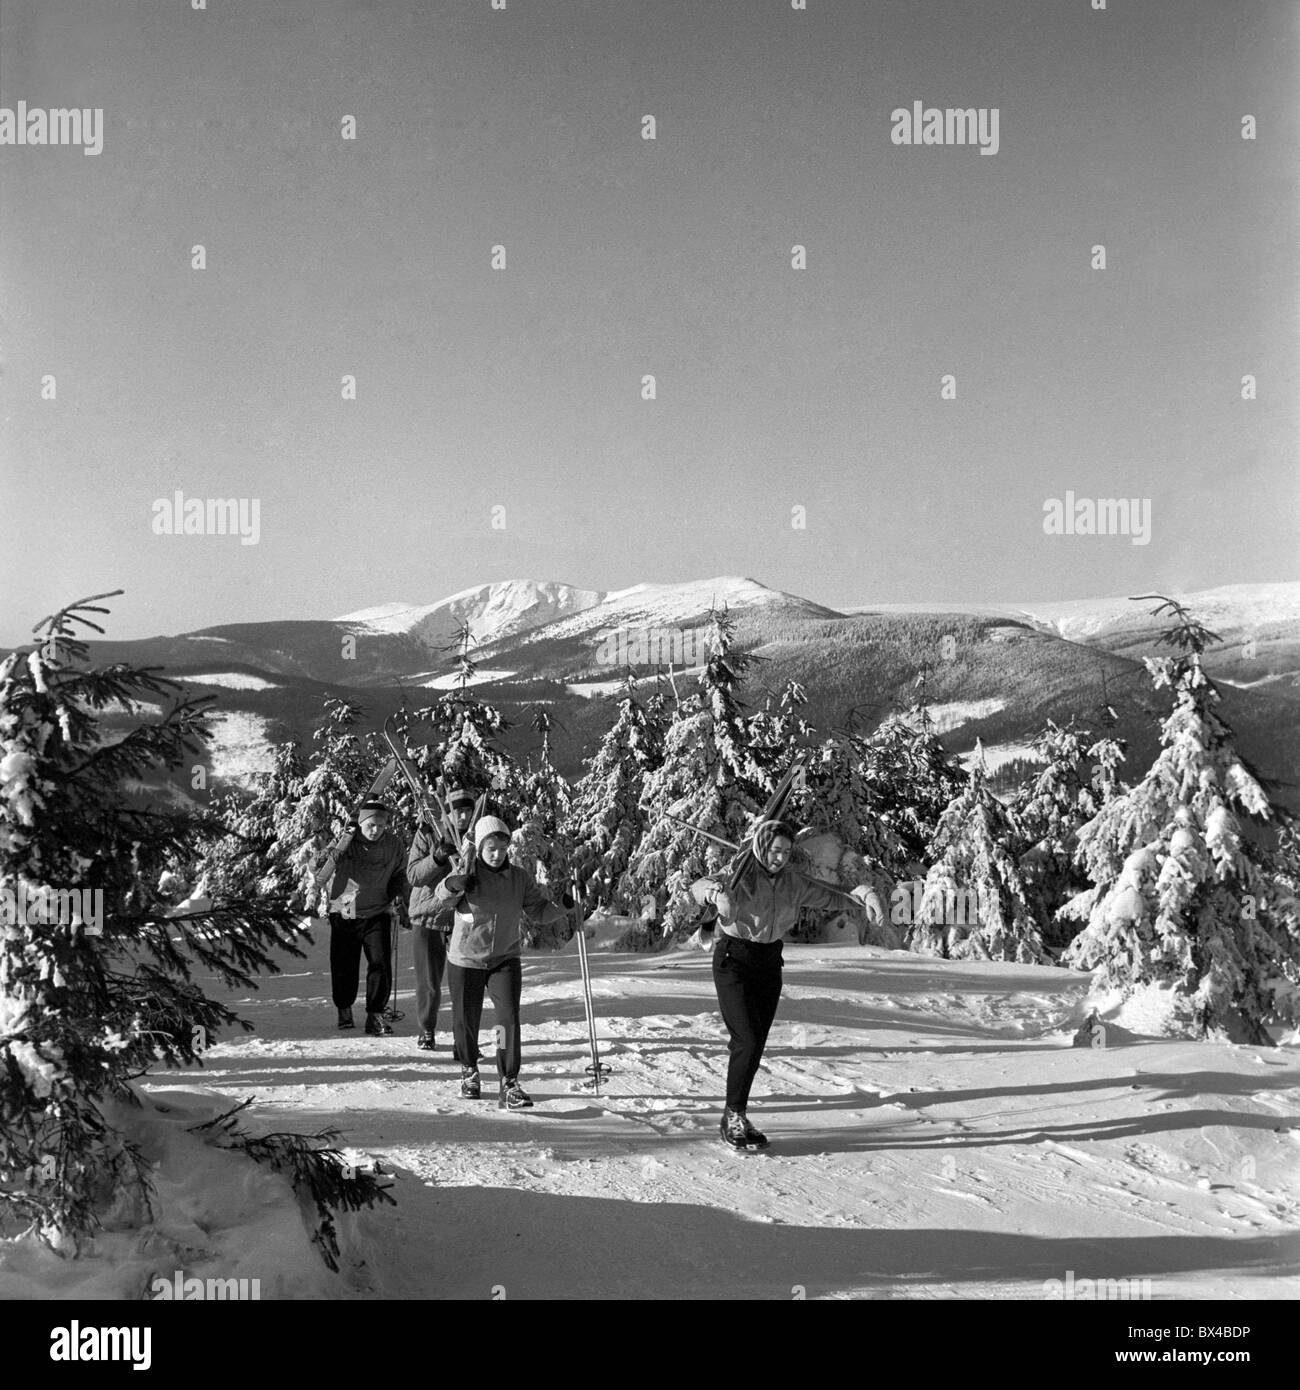 Riesengebirge mountains Black and White Stock Photos & Images - Alamy